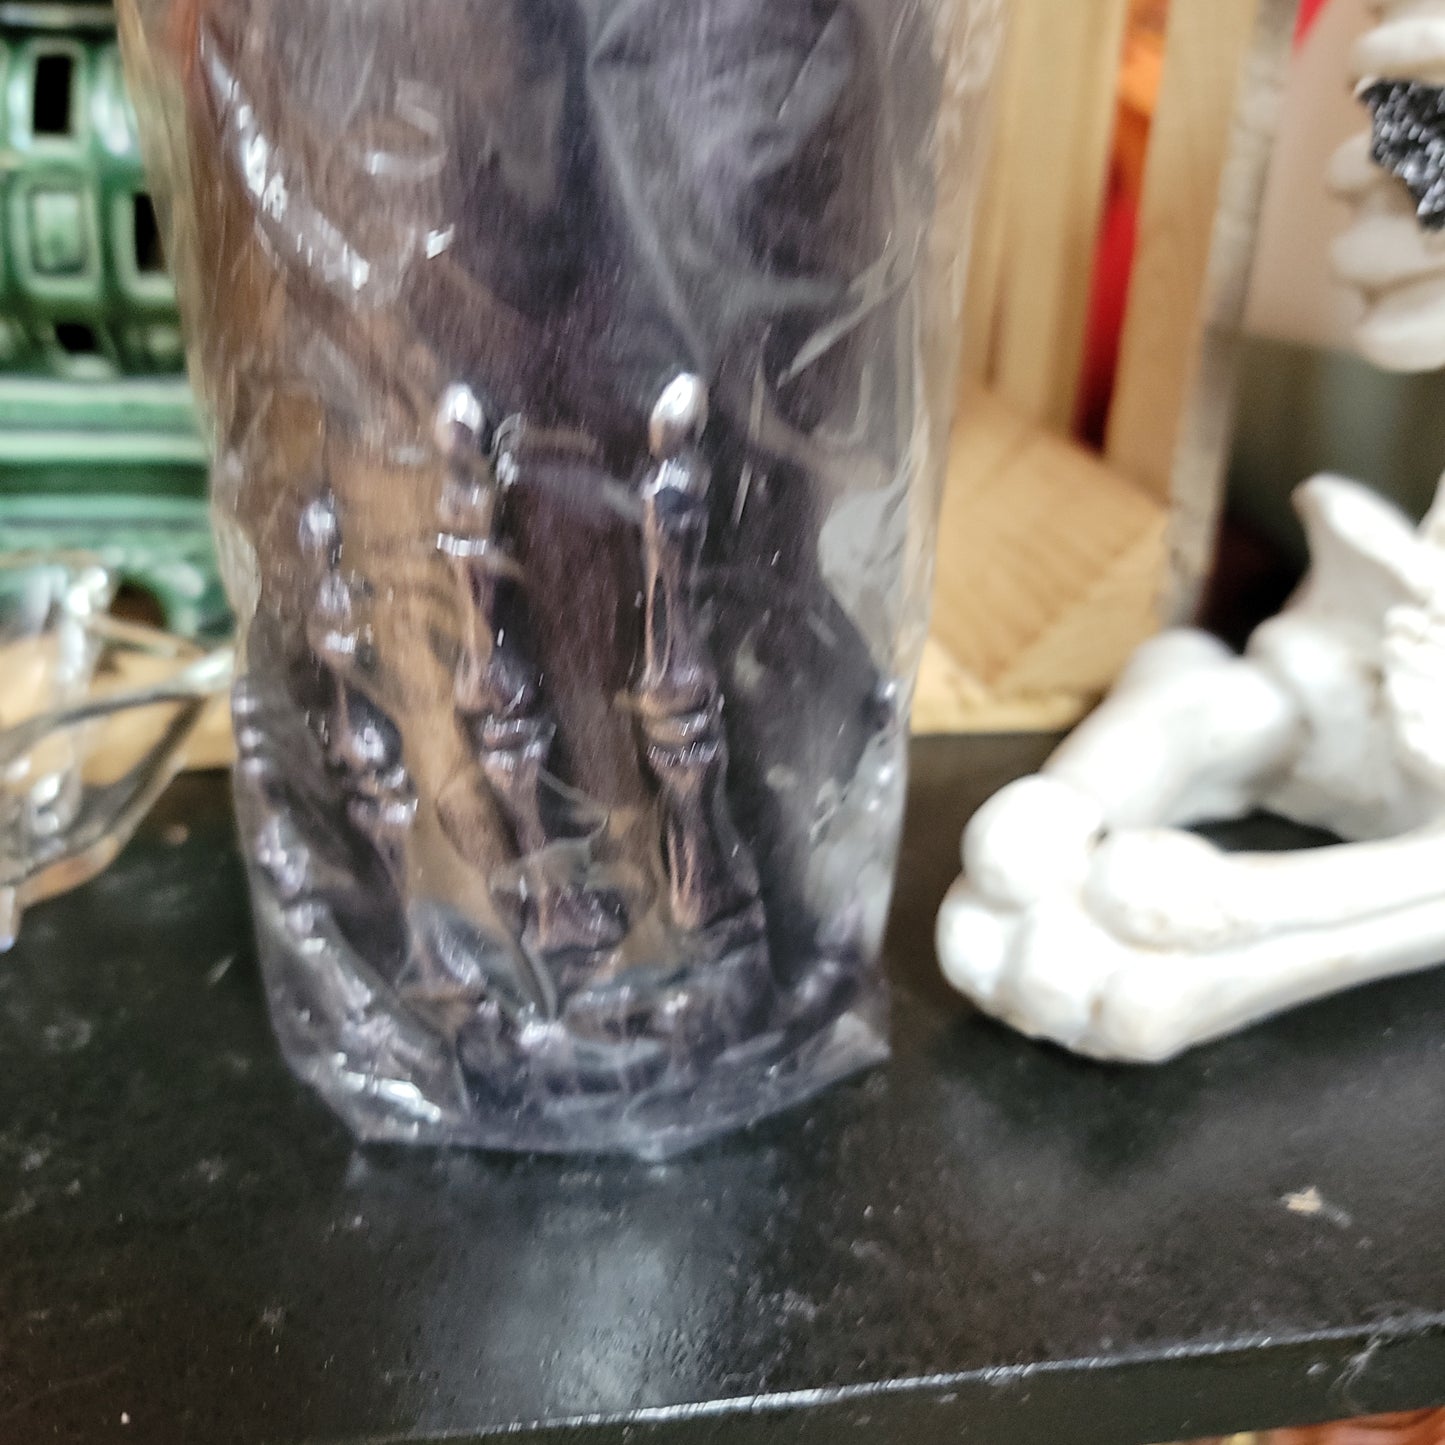 Tall Sculpted Skelly Hand Pillar Candles